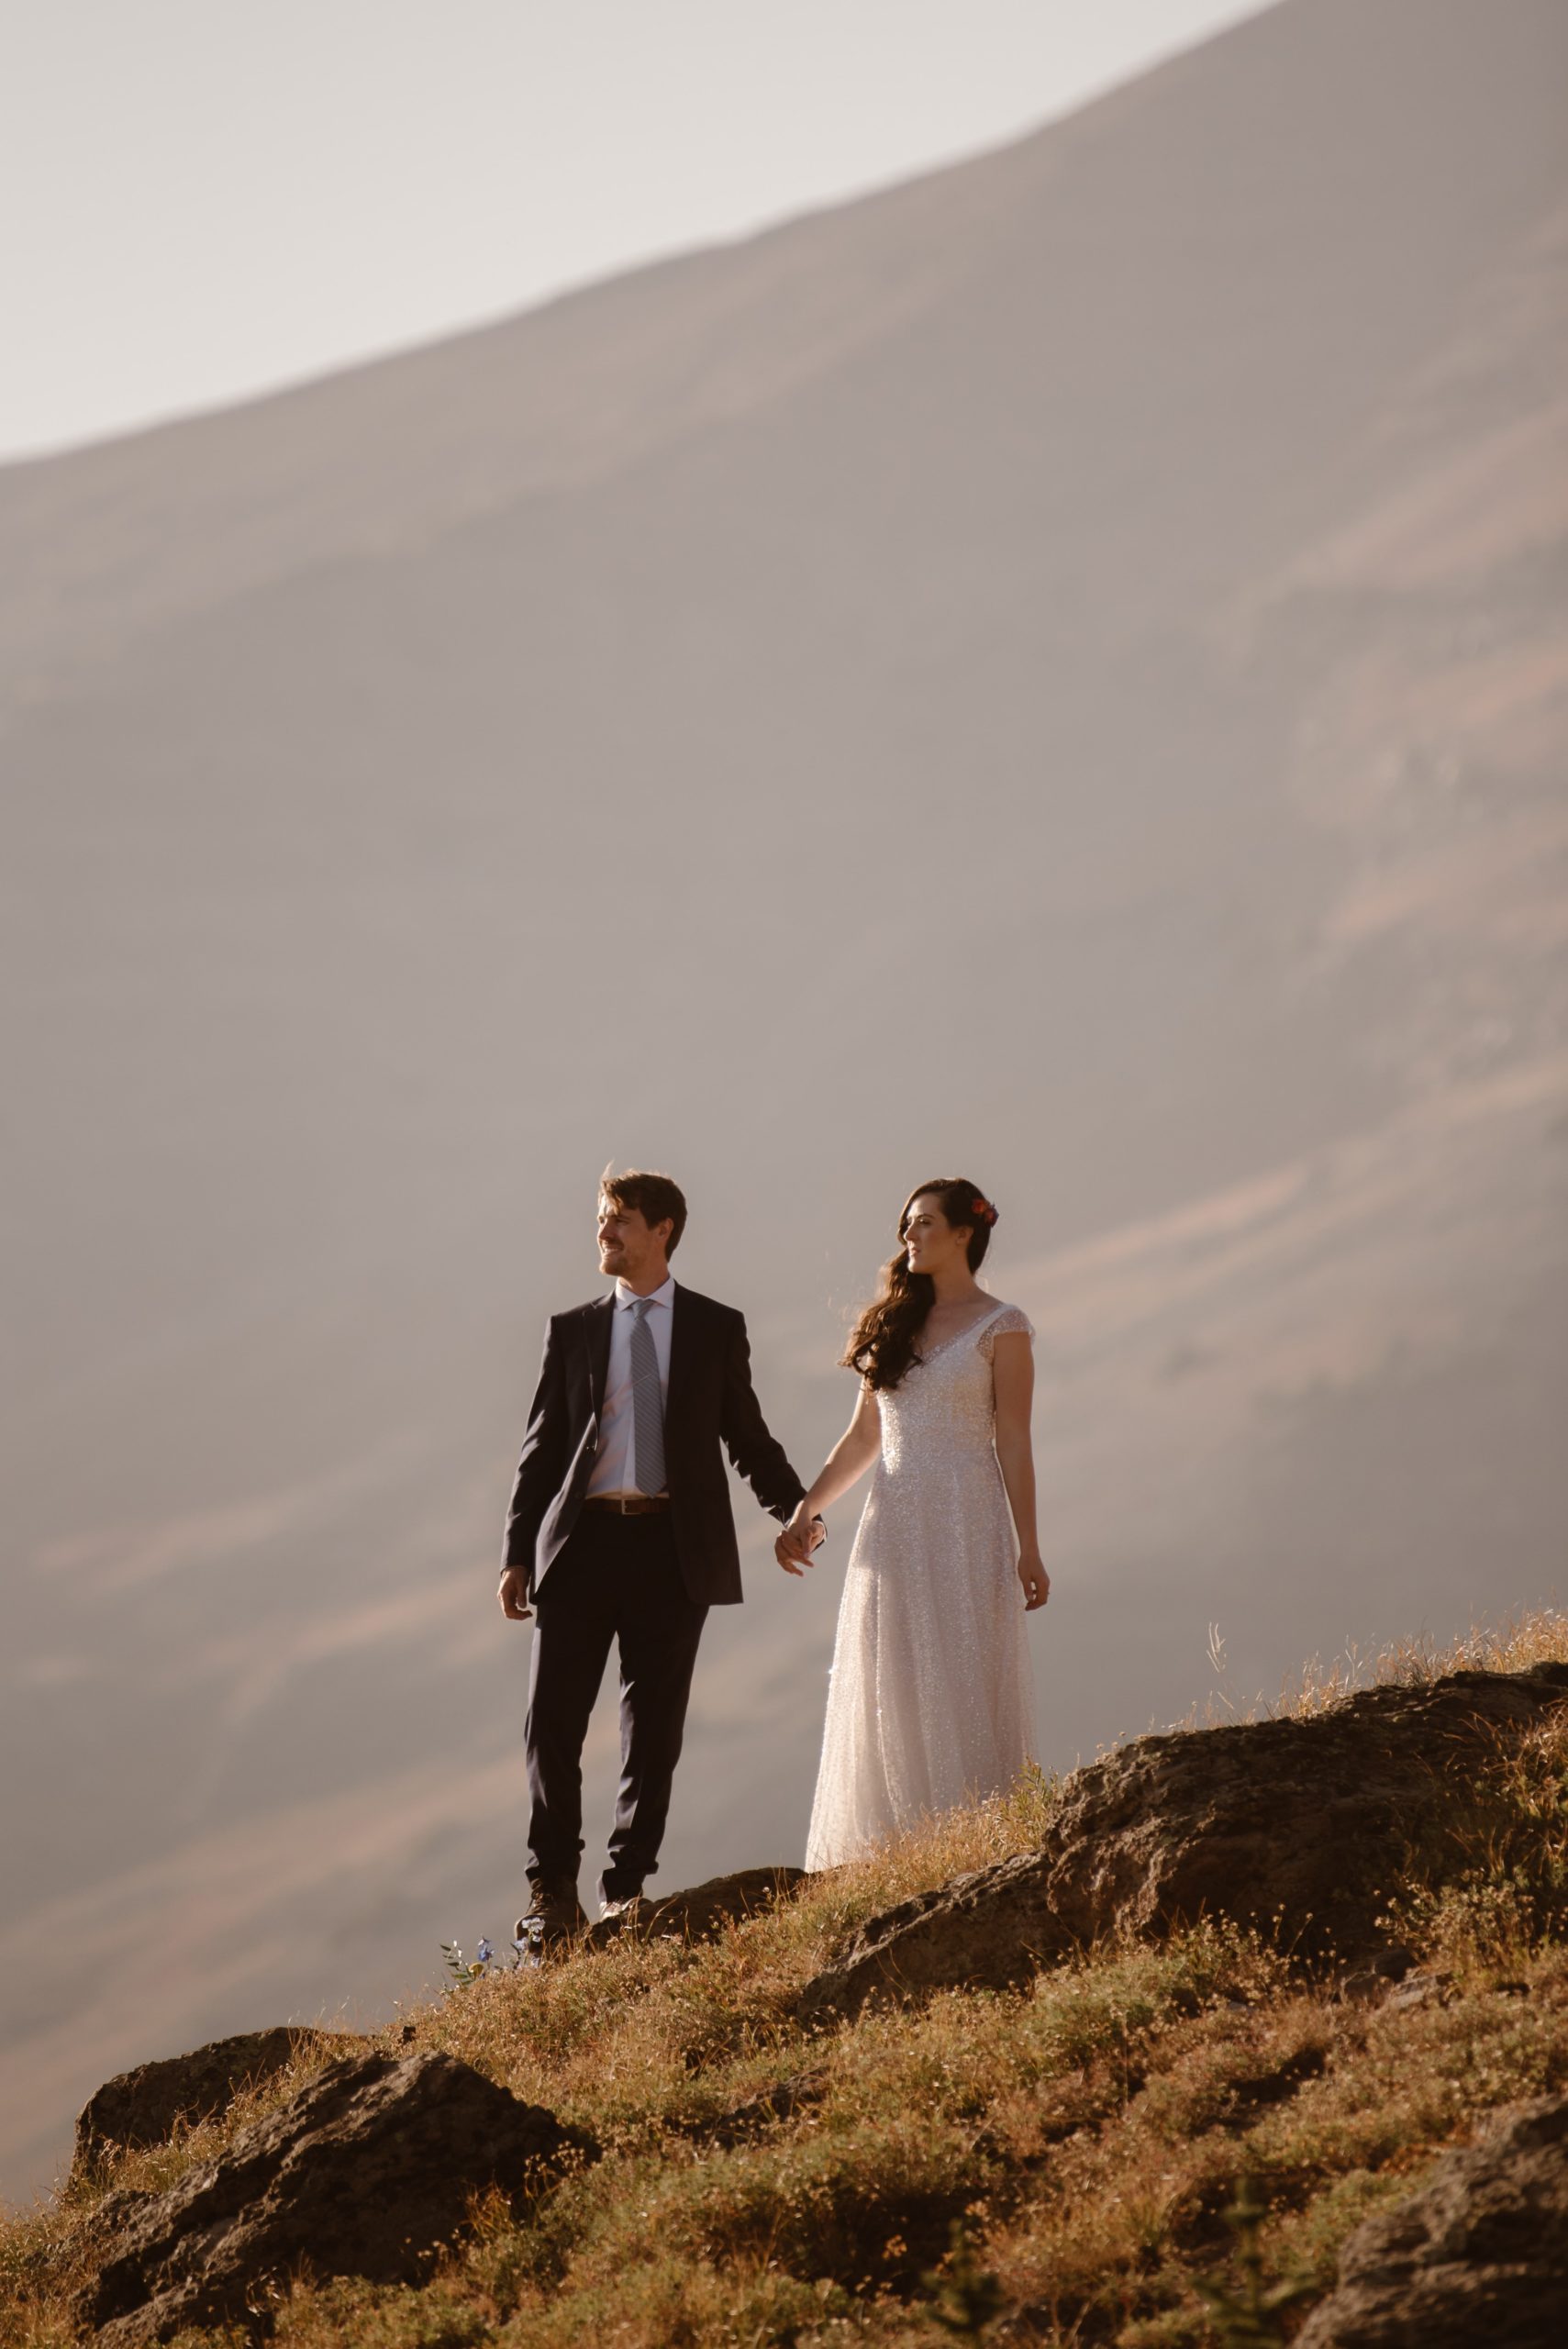 Bride and groom hold hands and look out at landscape in Crested Butte, Colorado. 